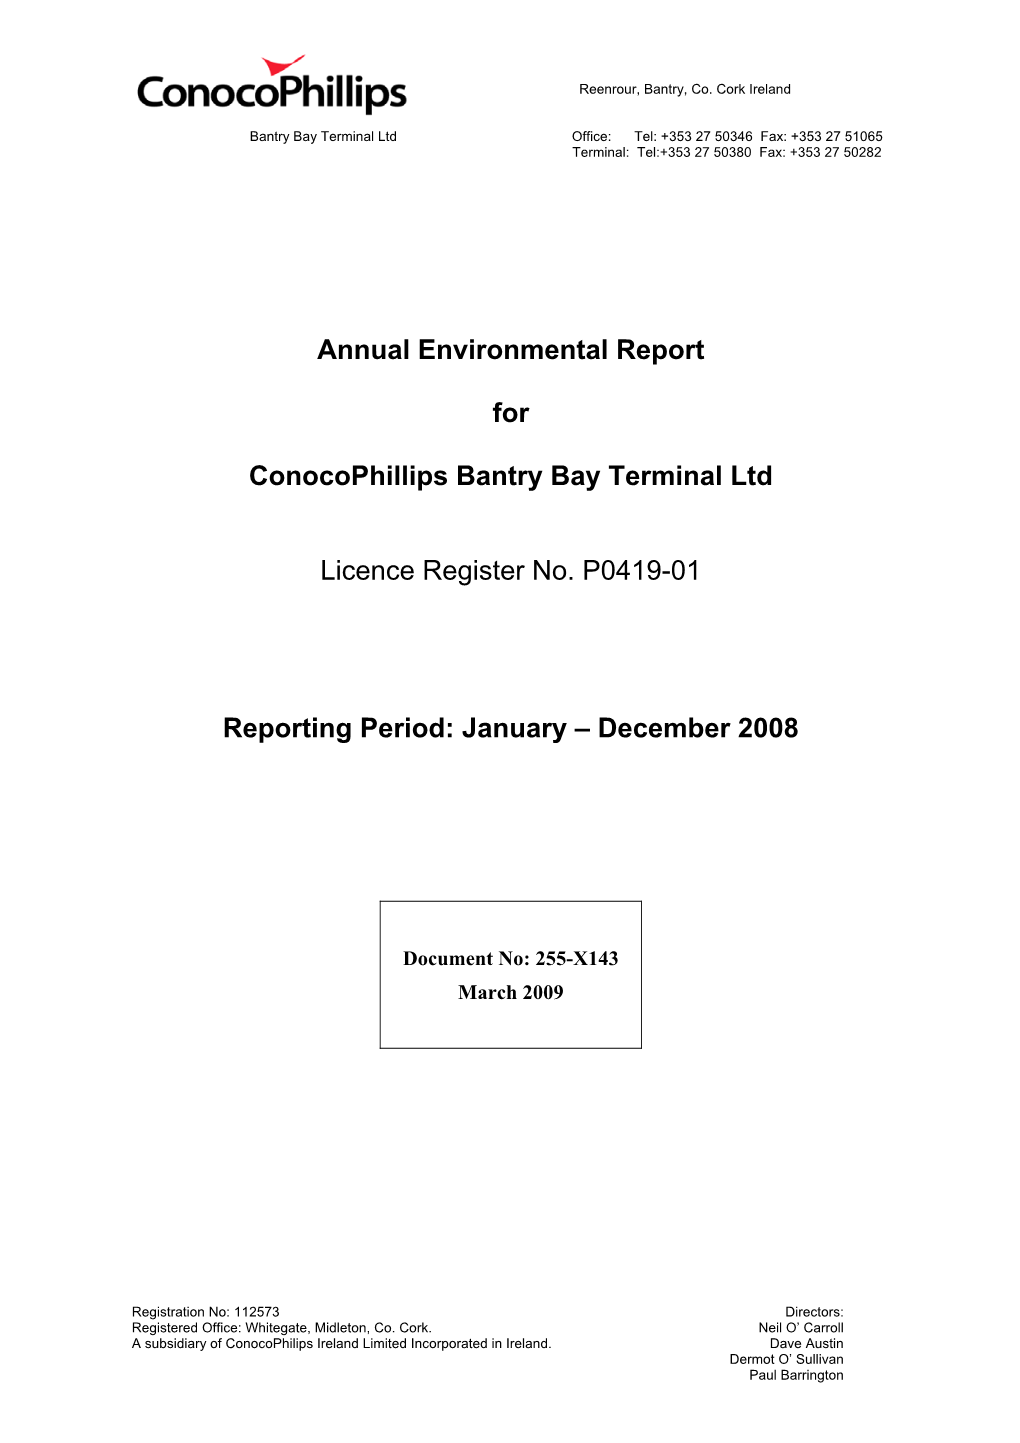 Annual Environmental Report for Conocophillips Bantry Bay